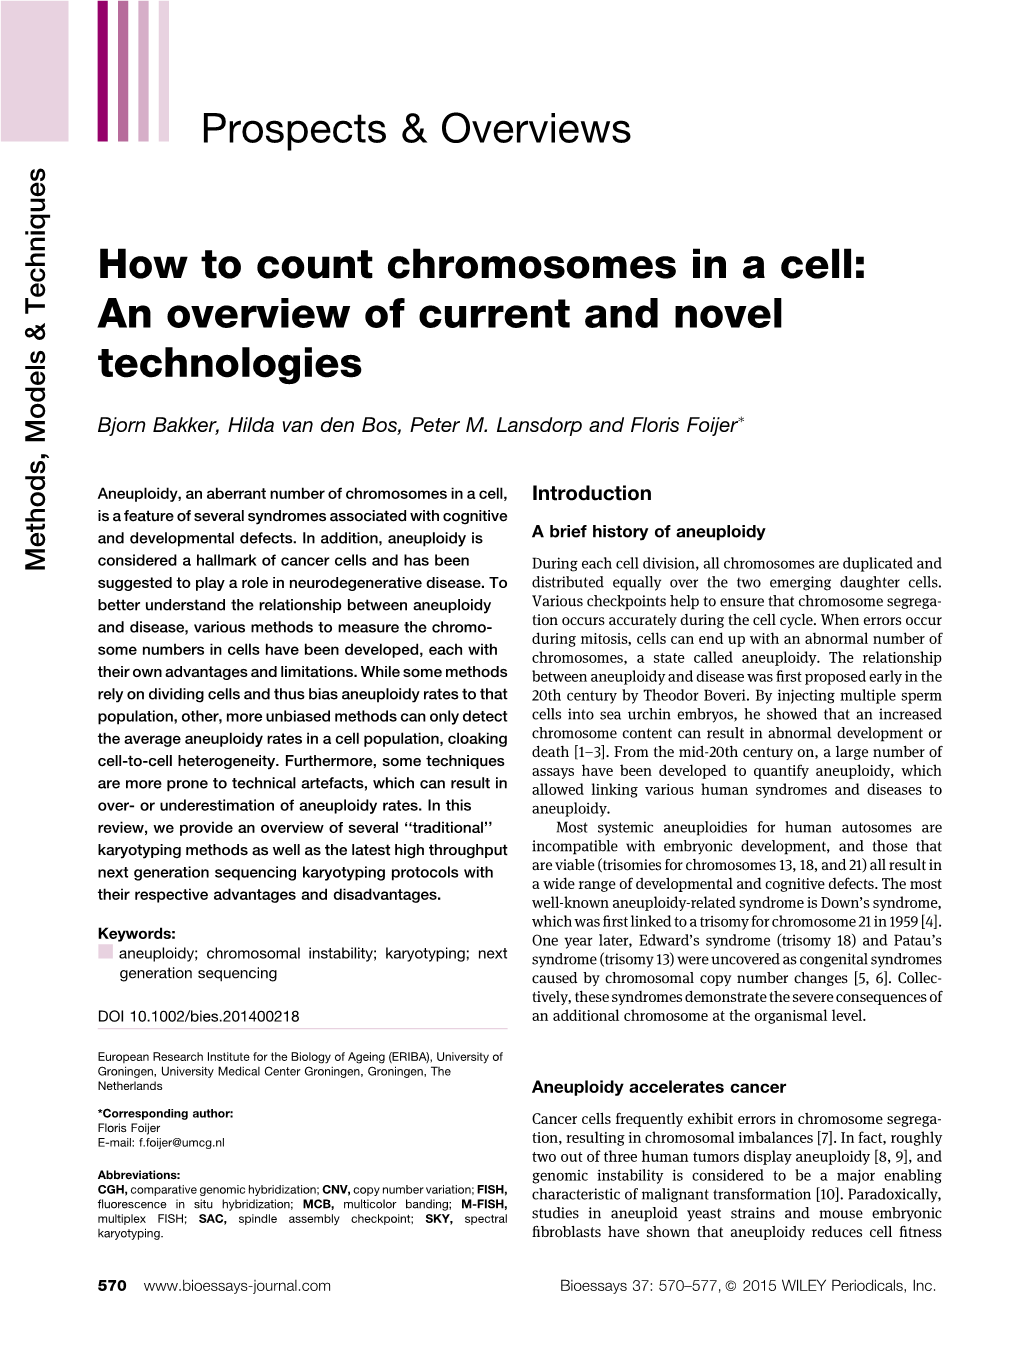 How to Count Chromosomes in a Cell: an Overview of Current and Novel Technologies